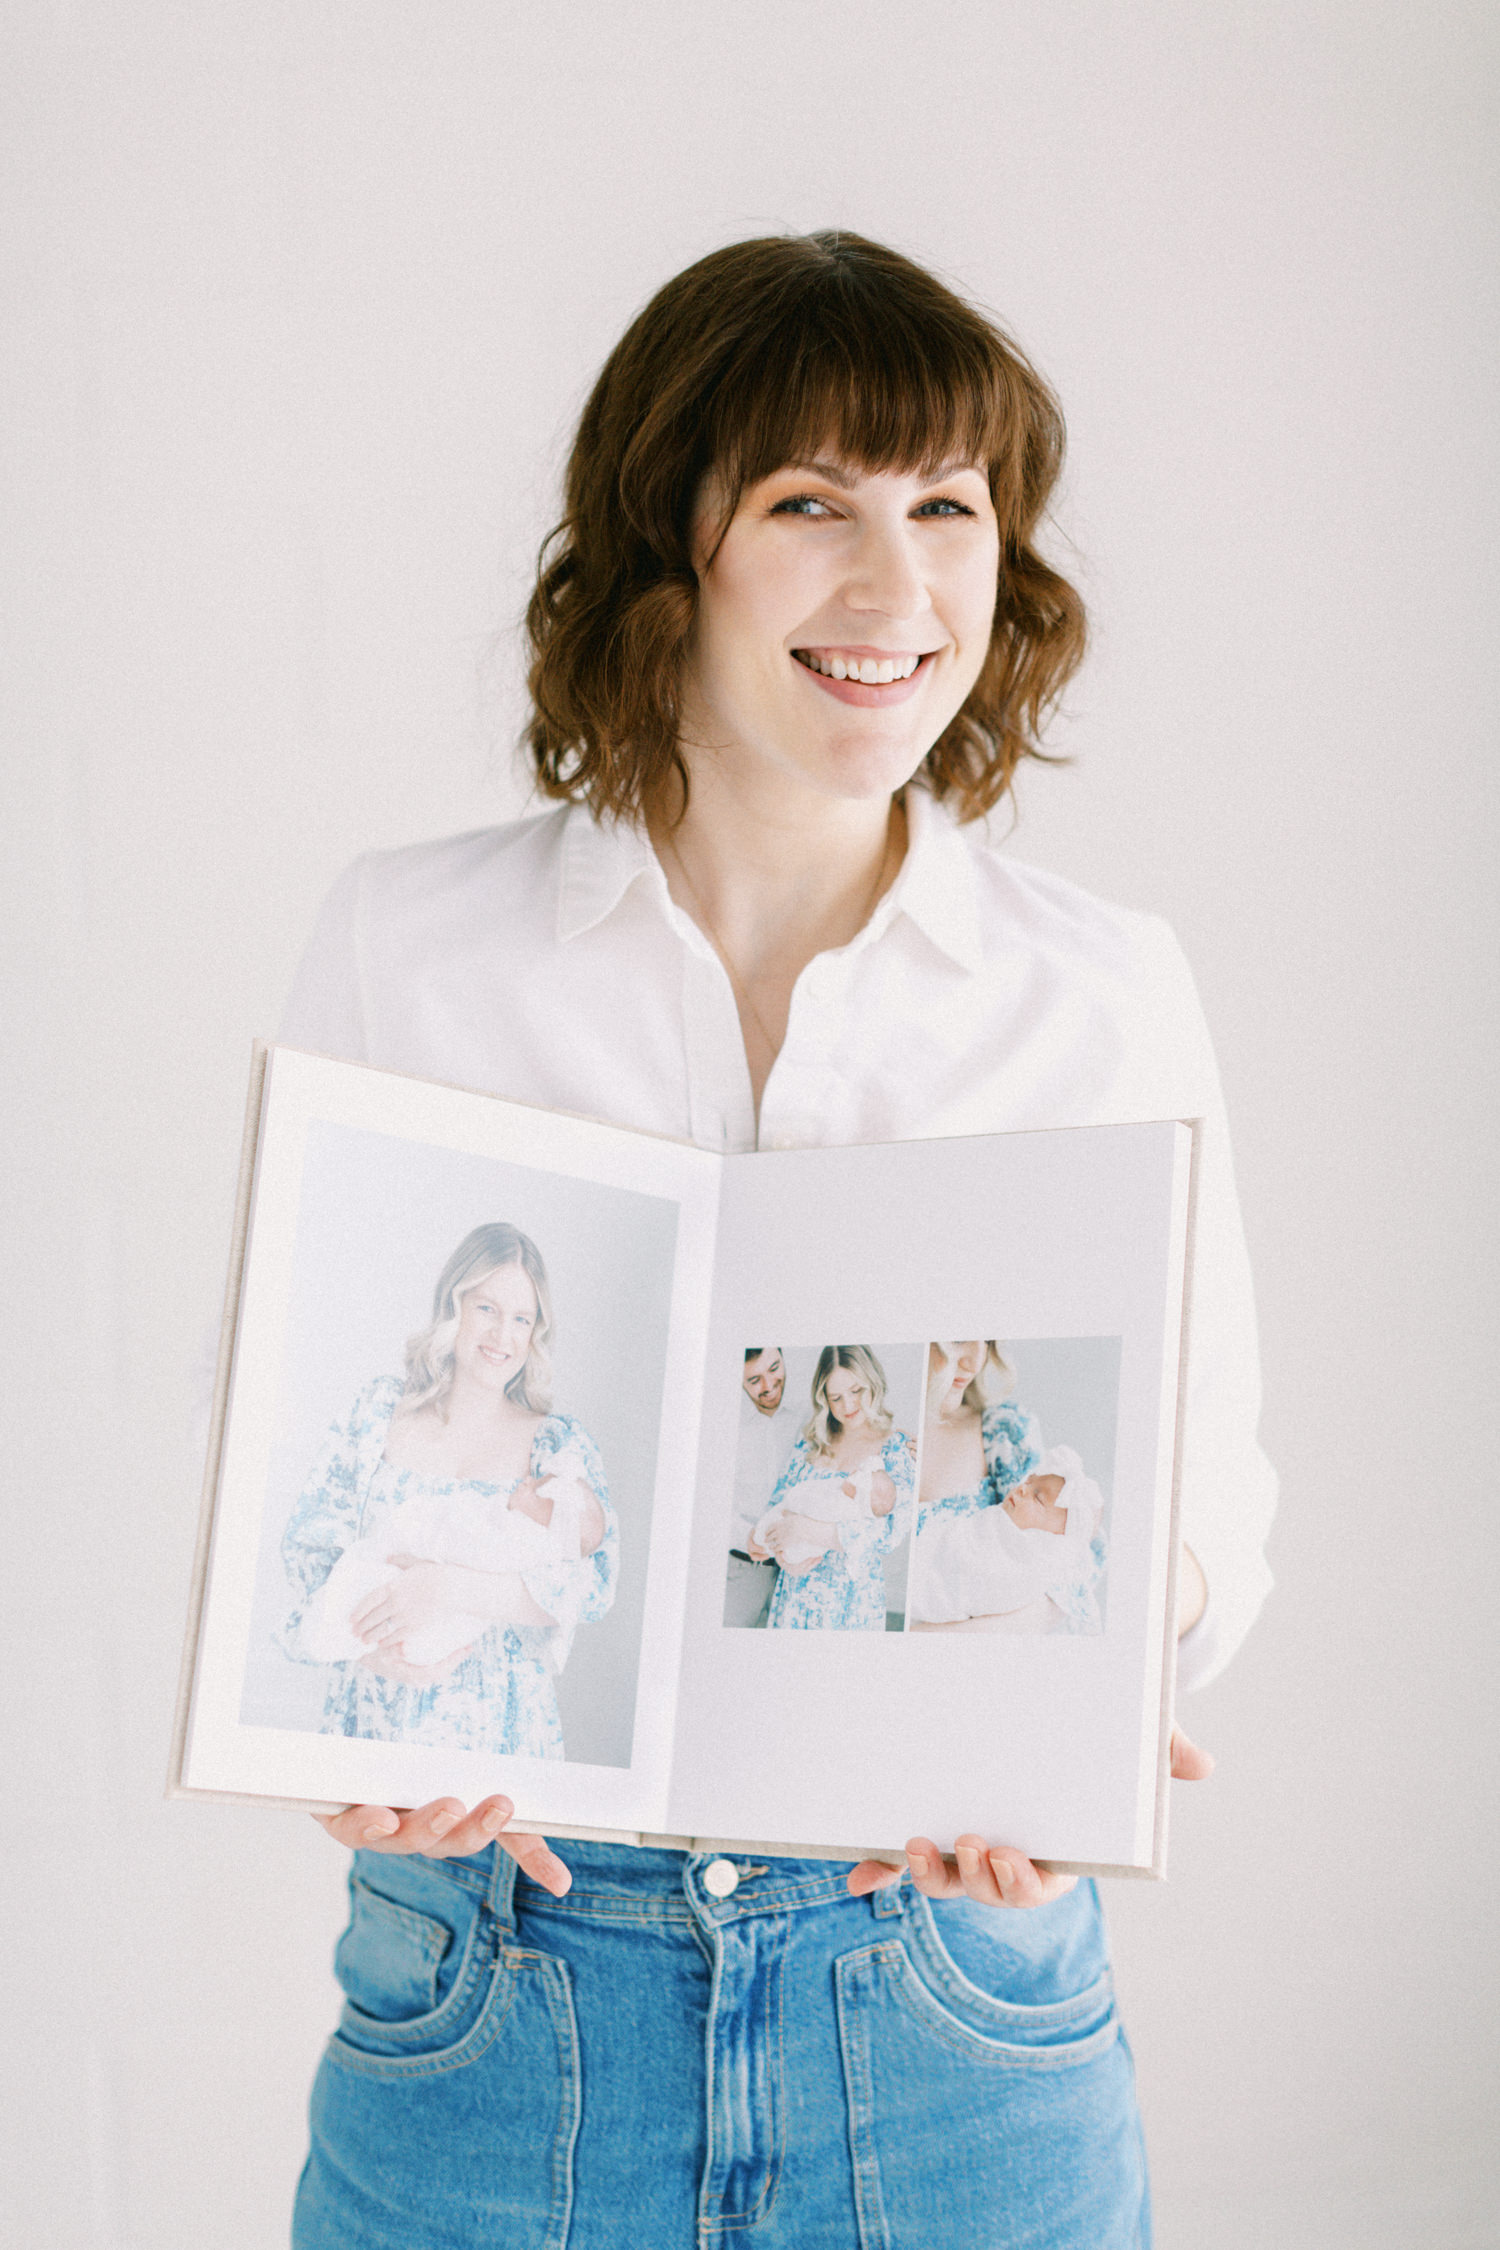 Toronto Newborn Photographer Emily Anderson smiling at the camera wearing a white button up shirt with jeans holding a fine art newborn album